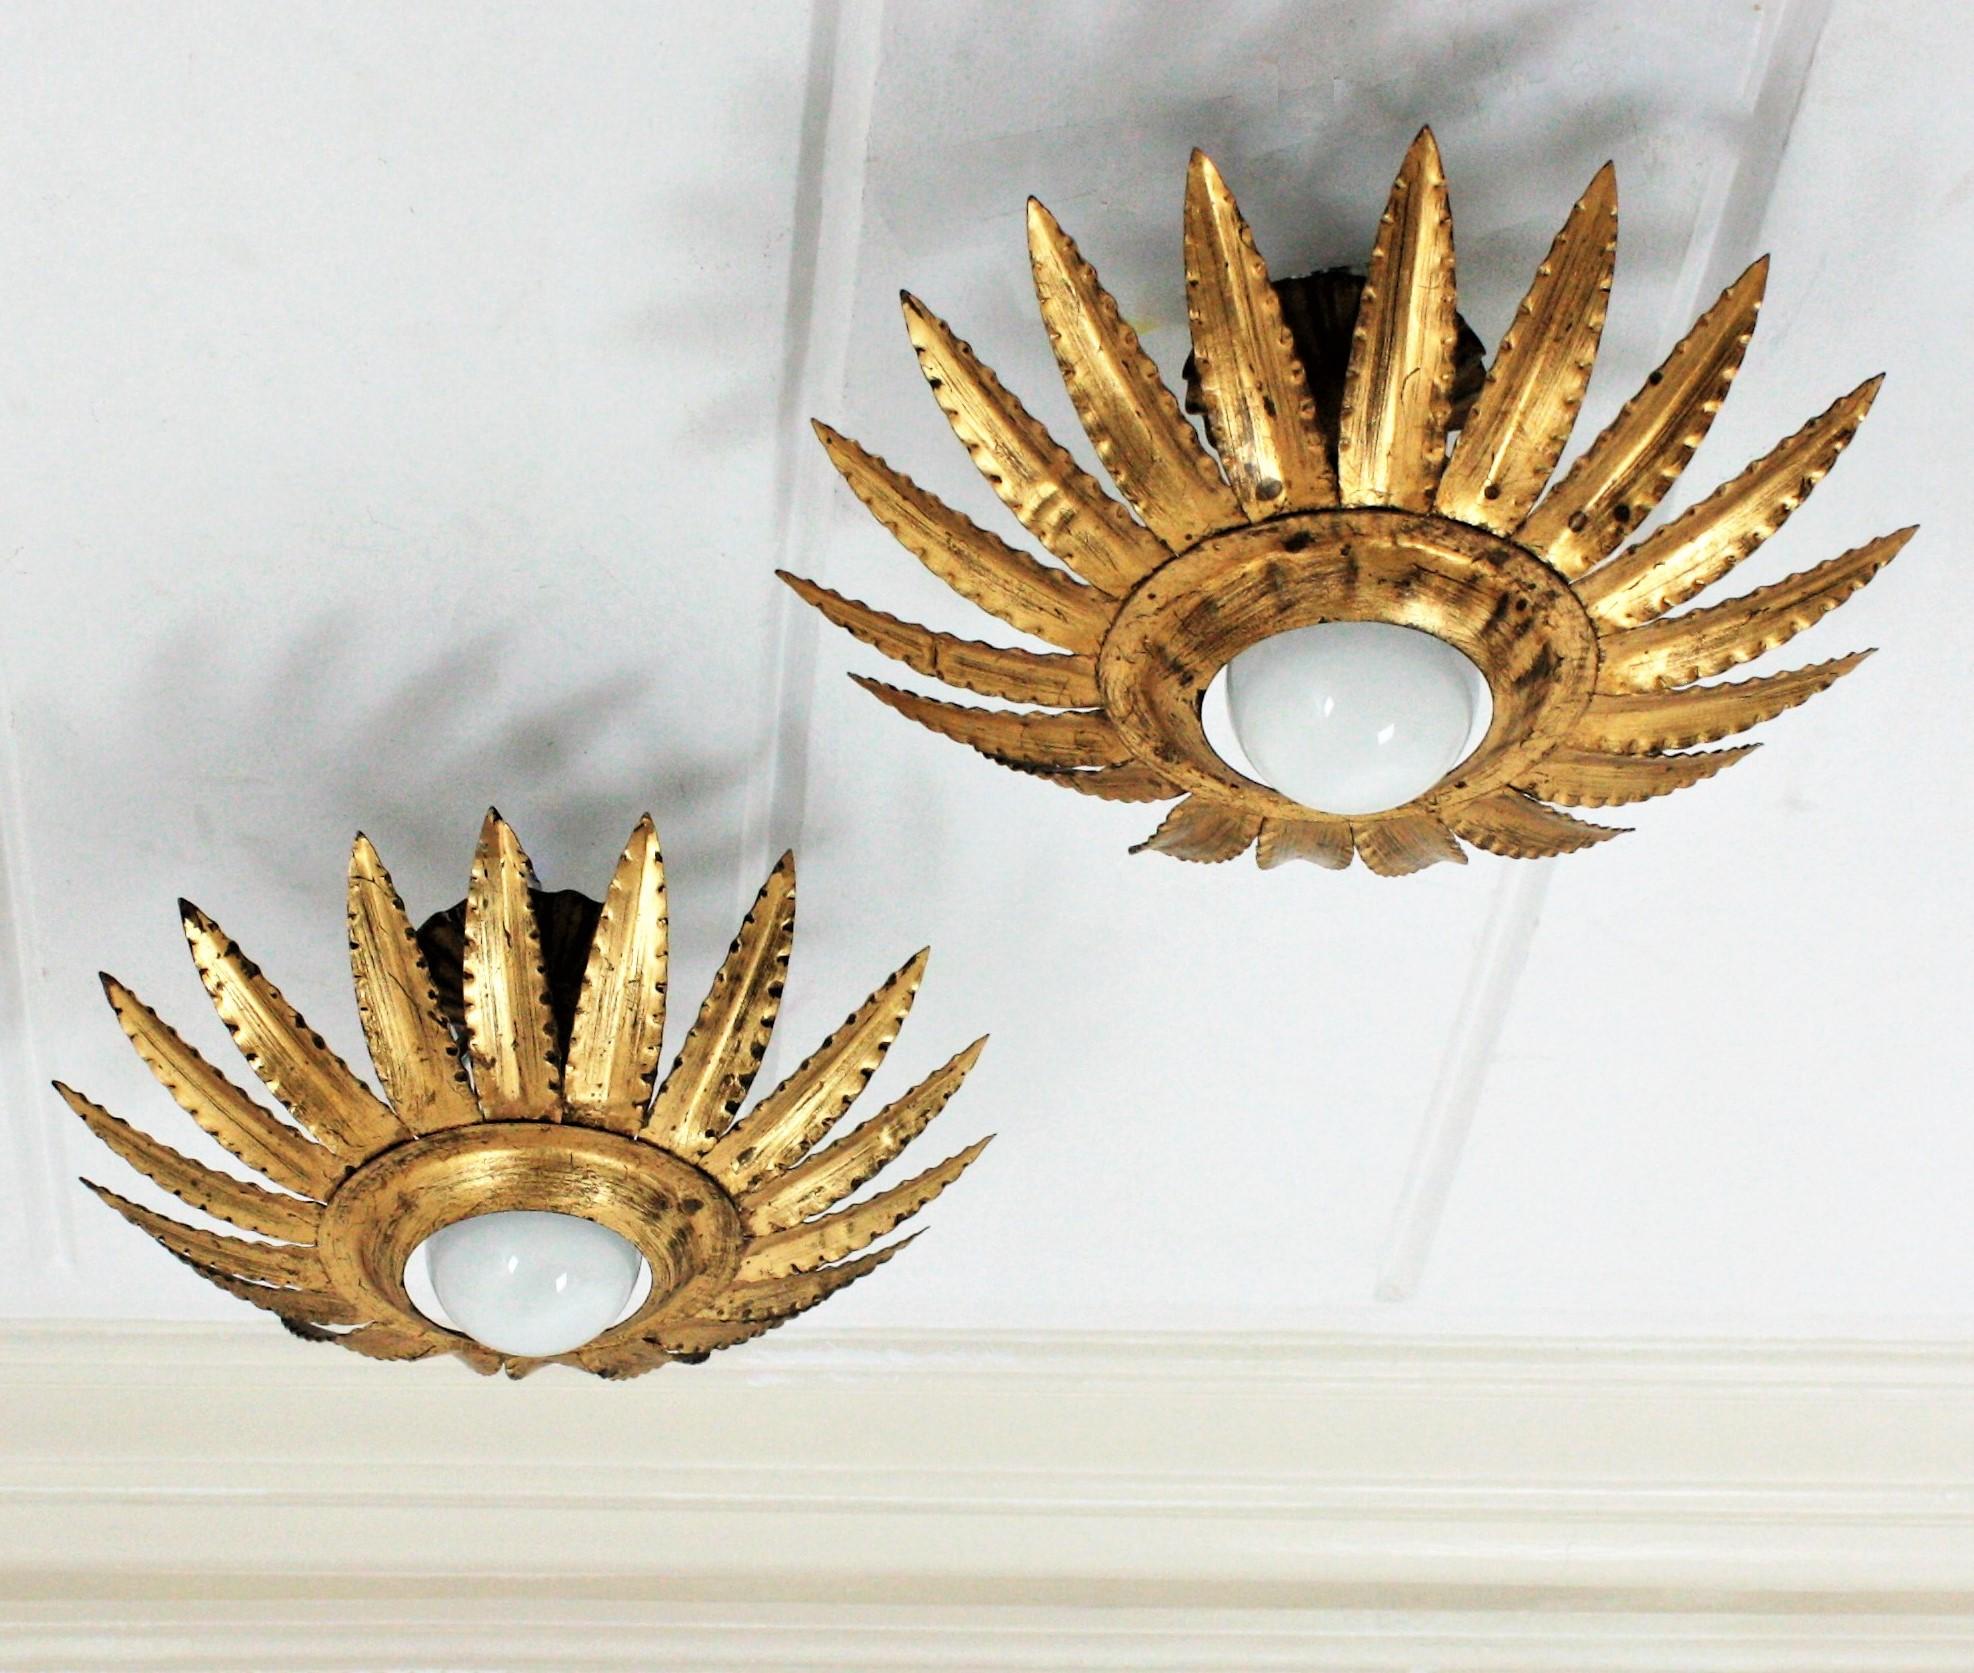 Pair of gilt wrought iron sunburst or flower shaped ceiling light fixtures, wall sconces or pendants, Spain, 1960s.
They have sunburst or flower shaped frames surrounding a central exposed bulb. Finished in gold leaf gilding with a terrific aged